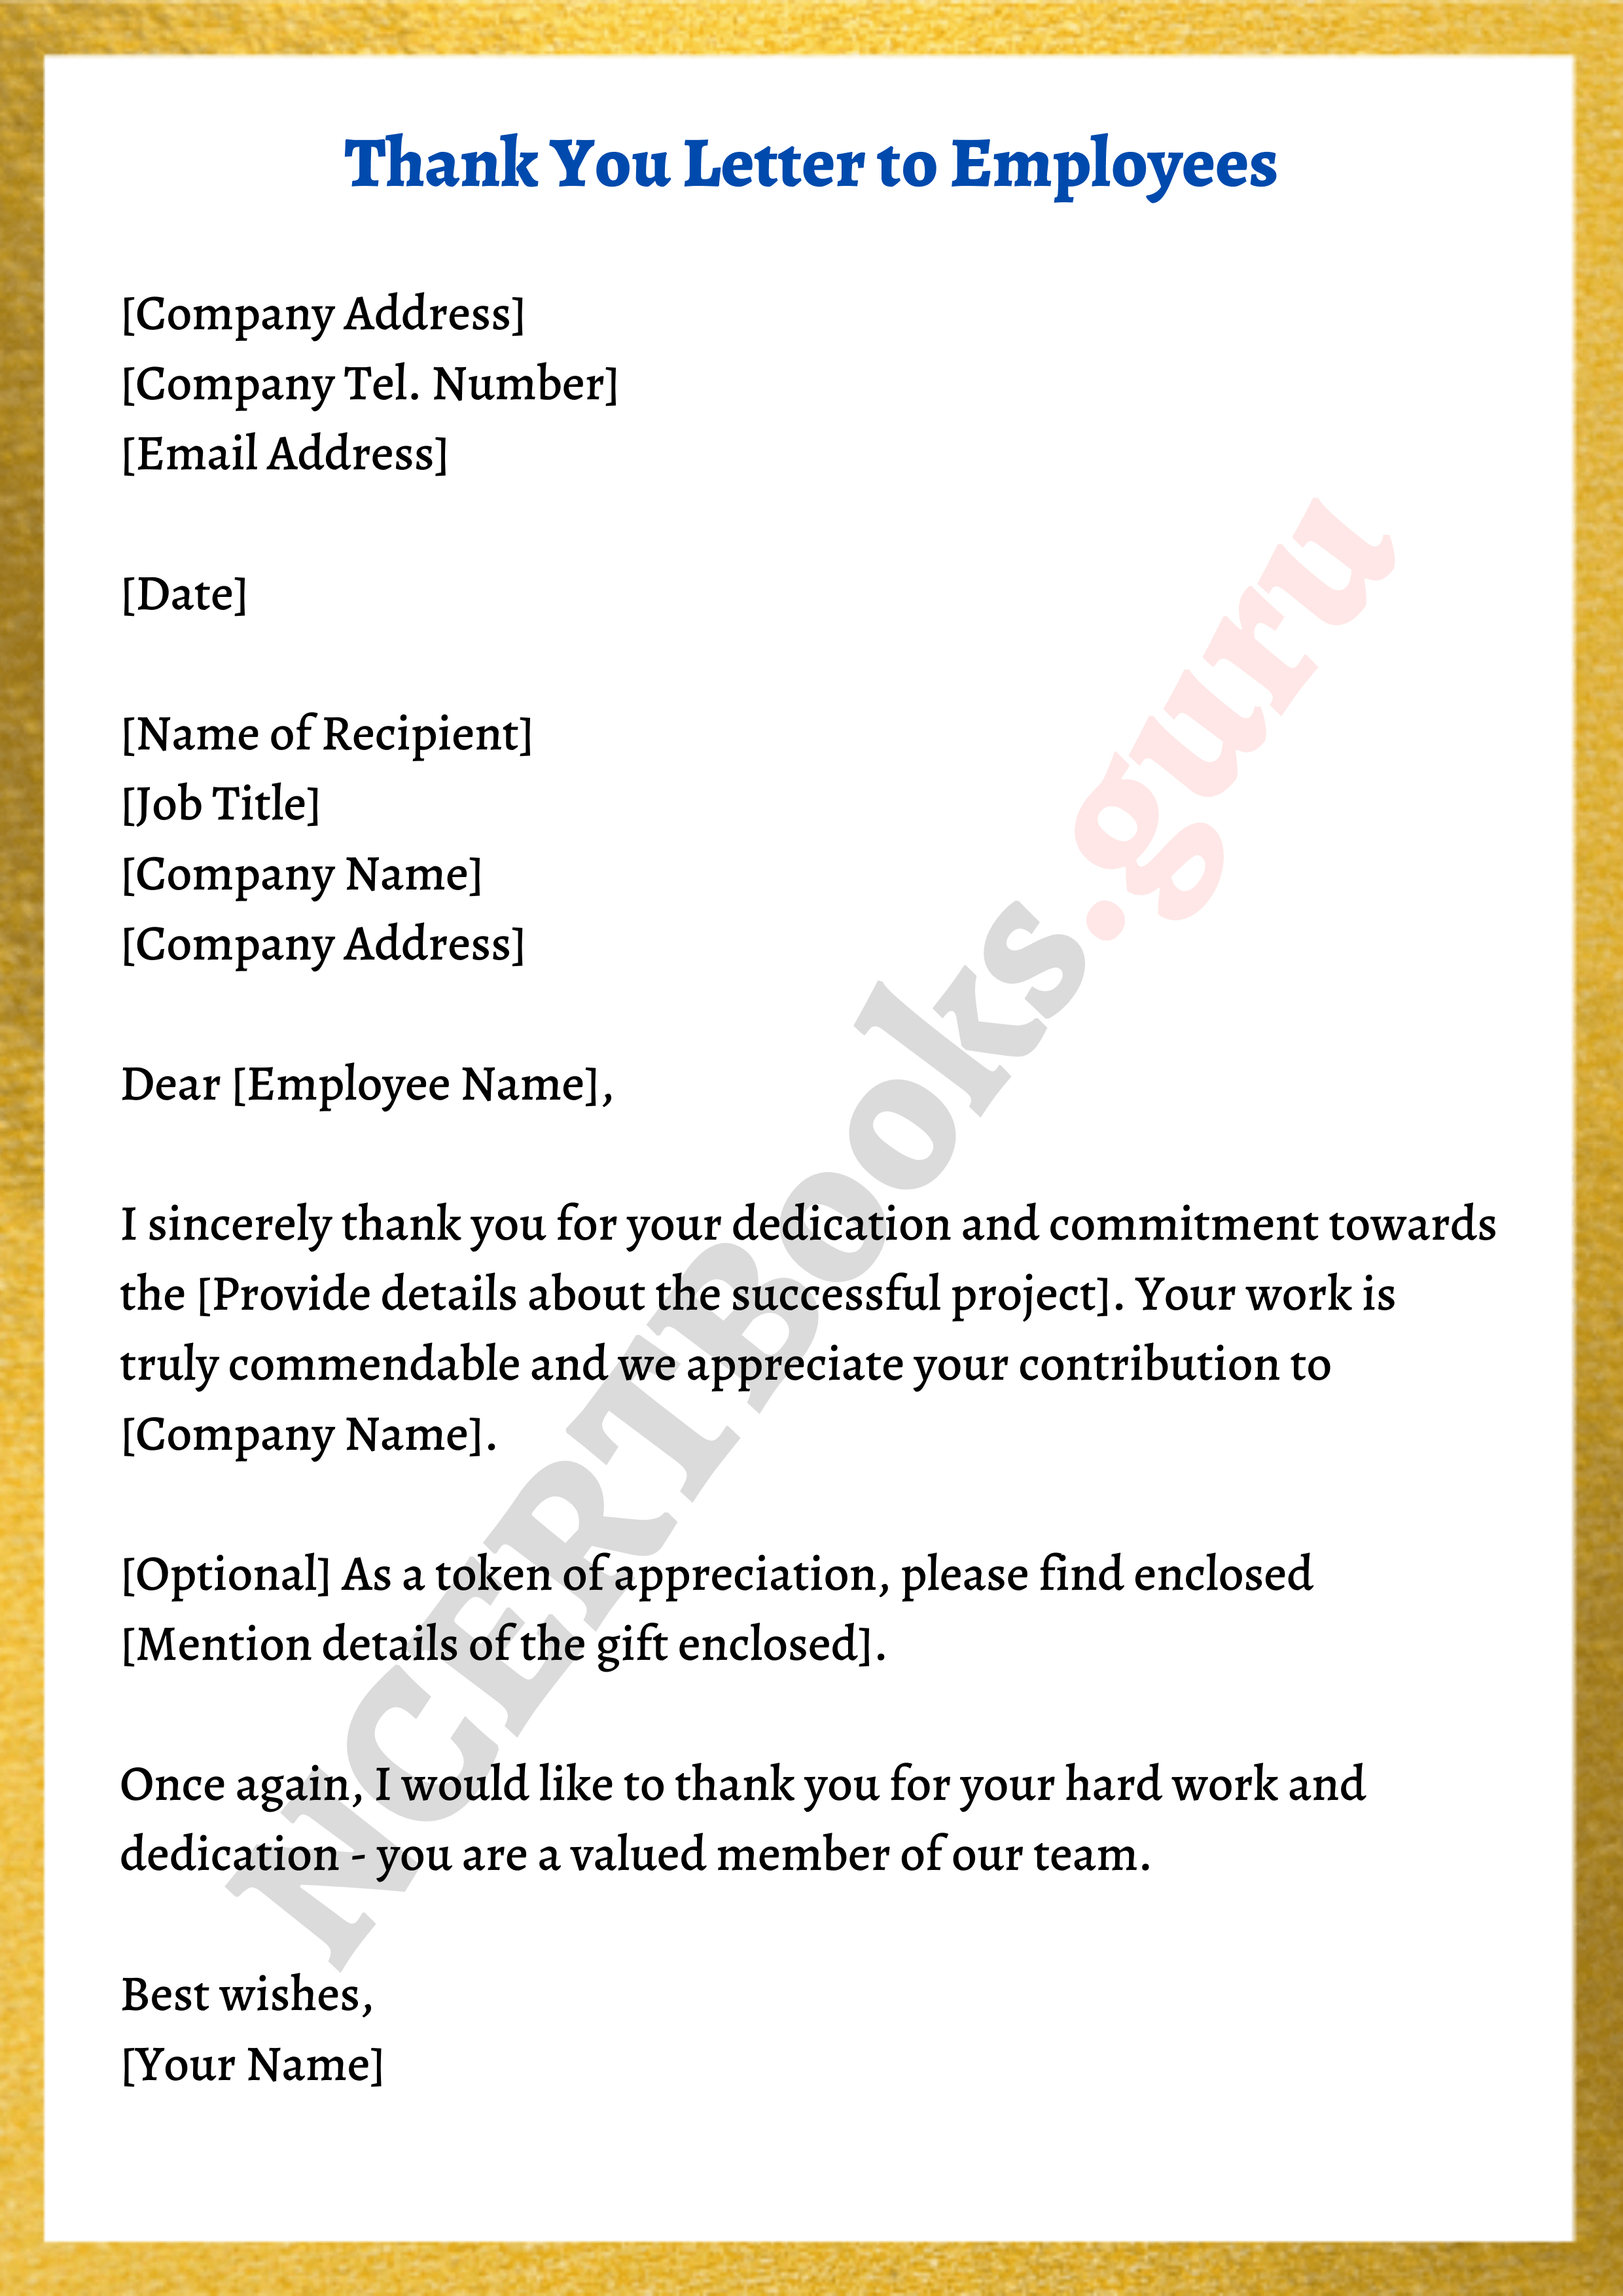 thank you to employees letter template